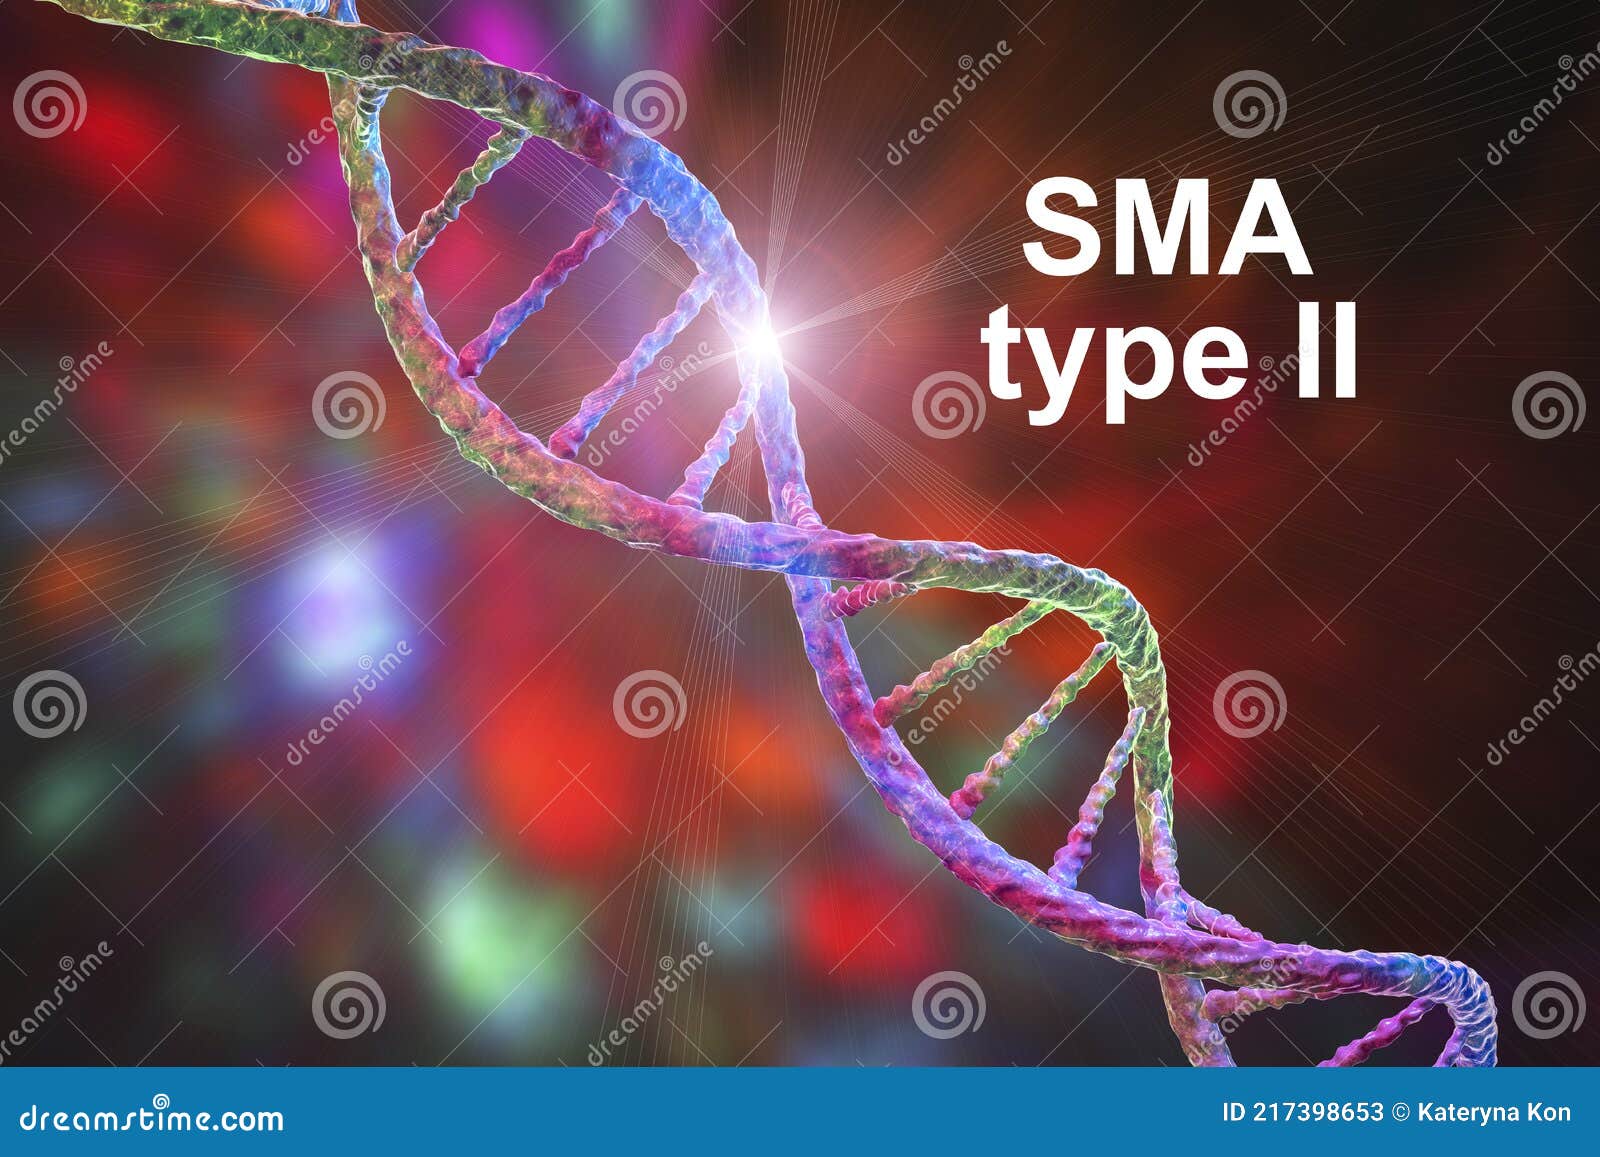 spinal muscular atrophy, sma, a genetic neuromuscular disorder